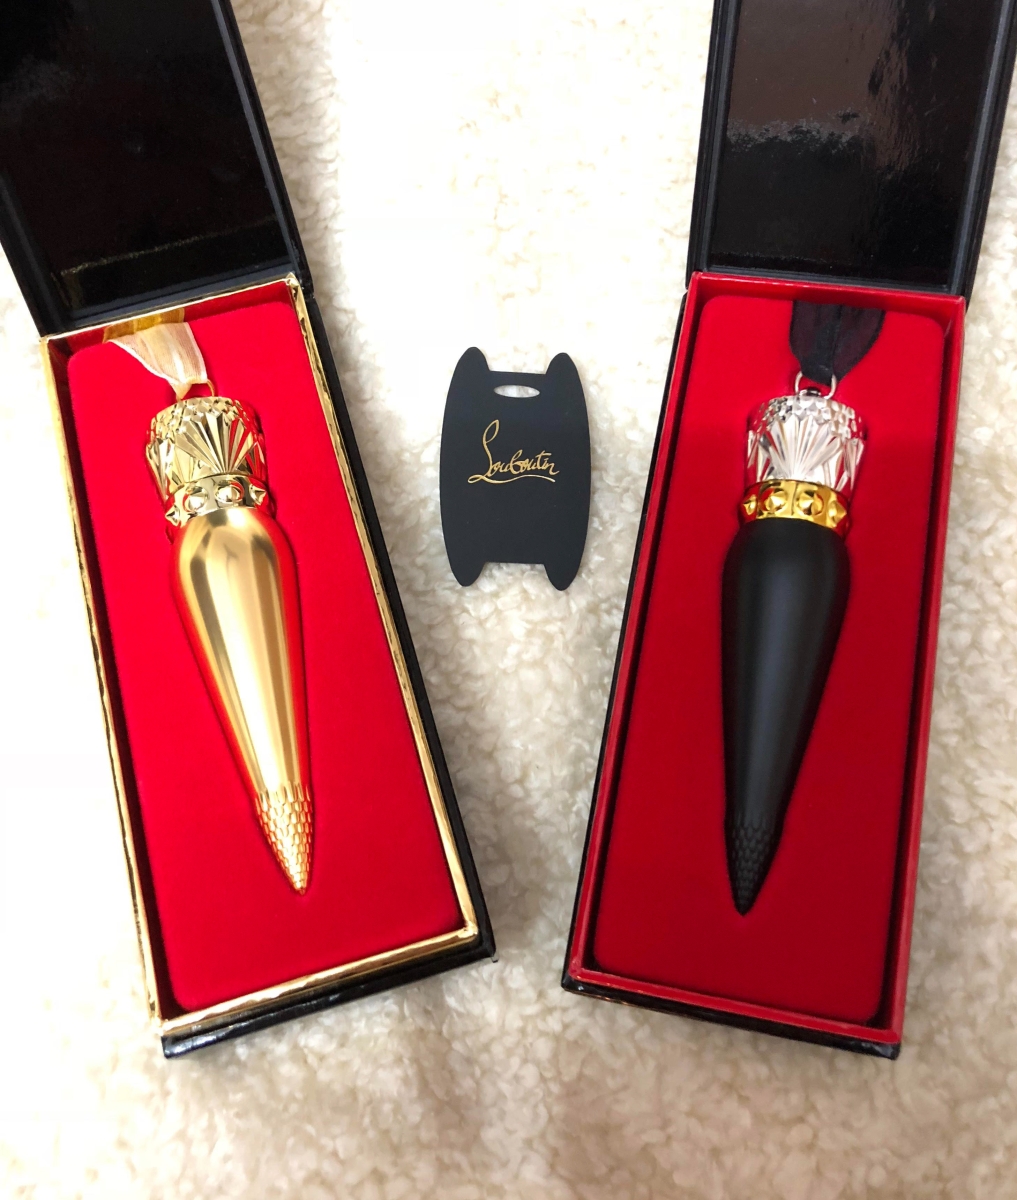 Christian Louboutin Sheer Voile Lip Colour review – Bay Area